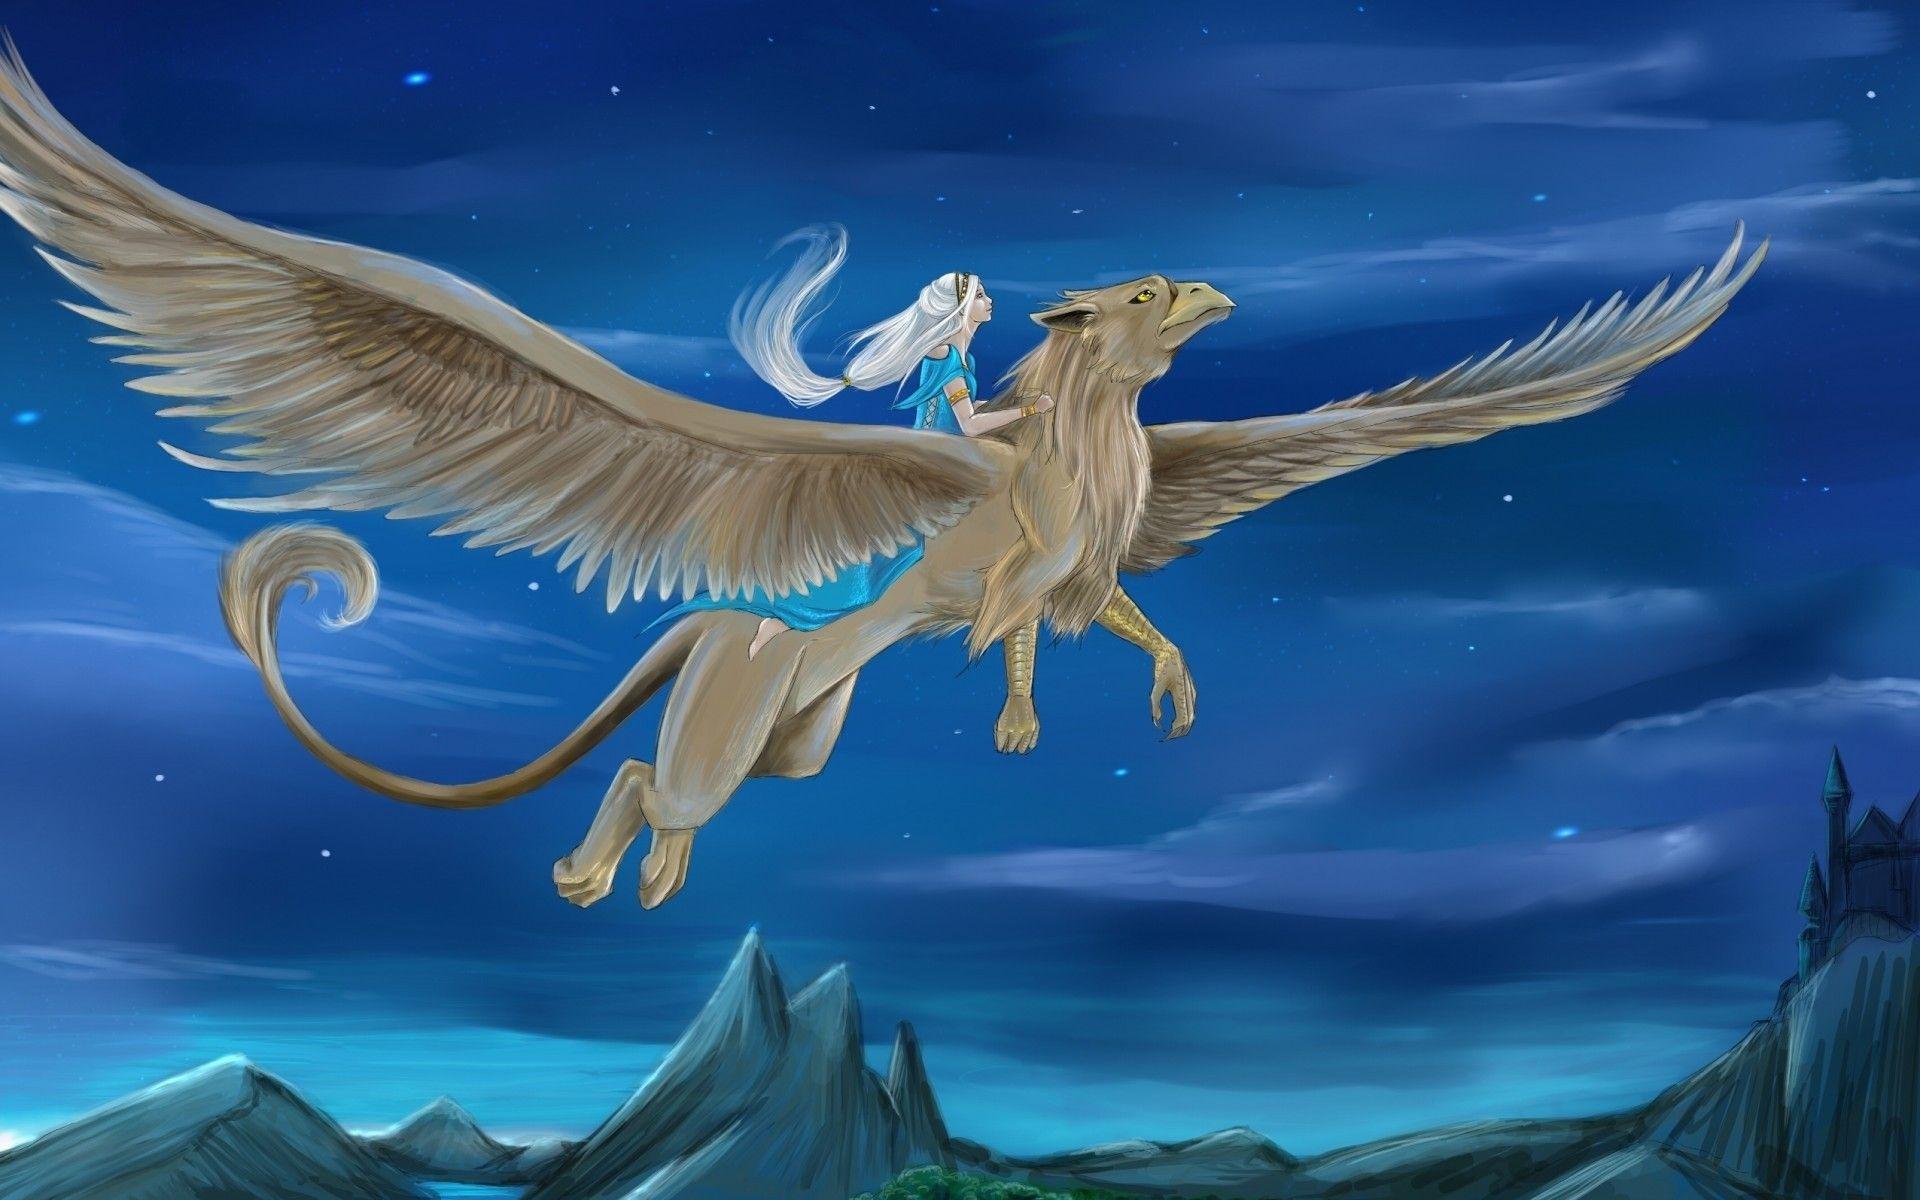 Princess Gryphon wallpaper and image, picture, photo